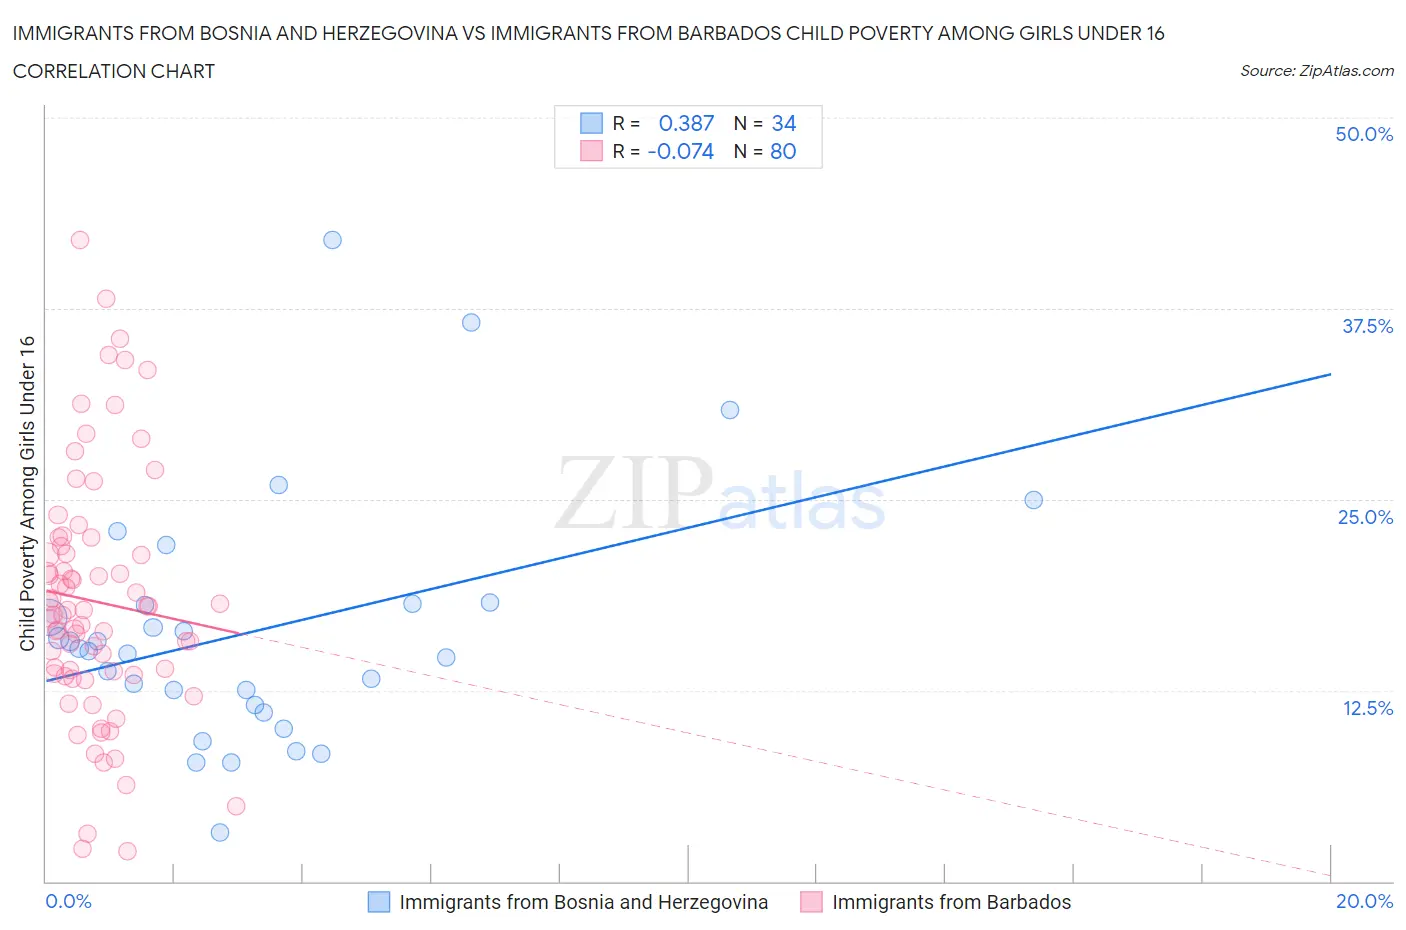 Immigrants from Bosnia and Herzegovina vs Immigrants from Barbados Child Poverty Among Girls Under 16